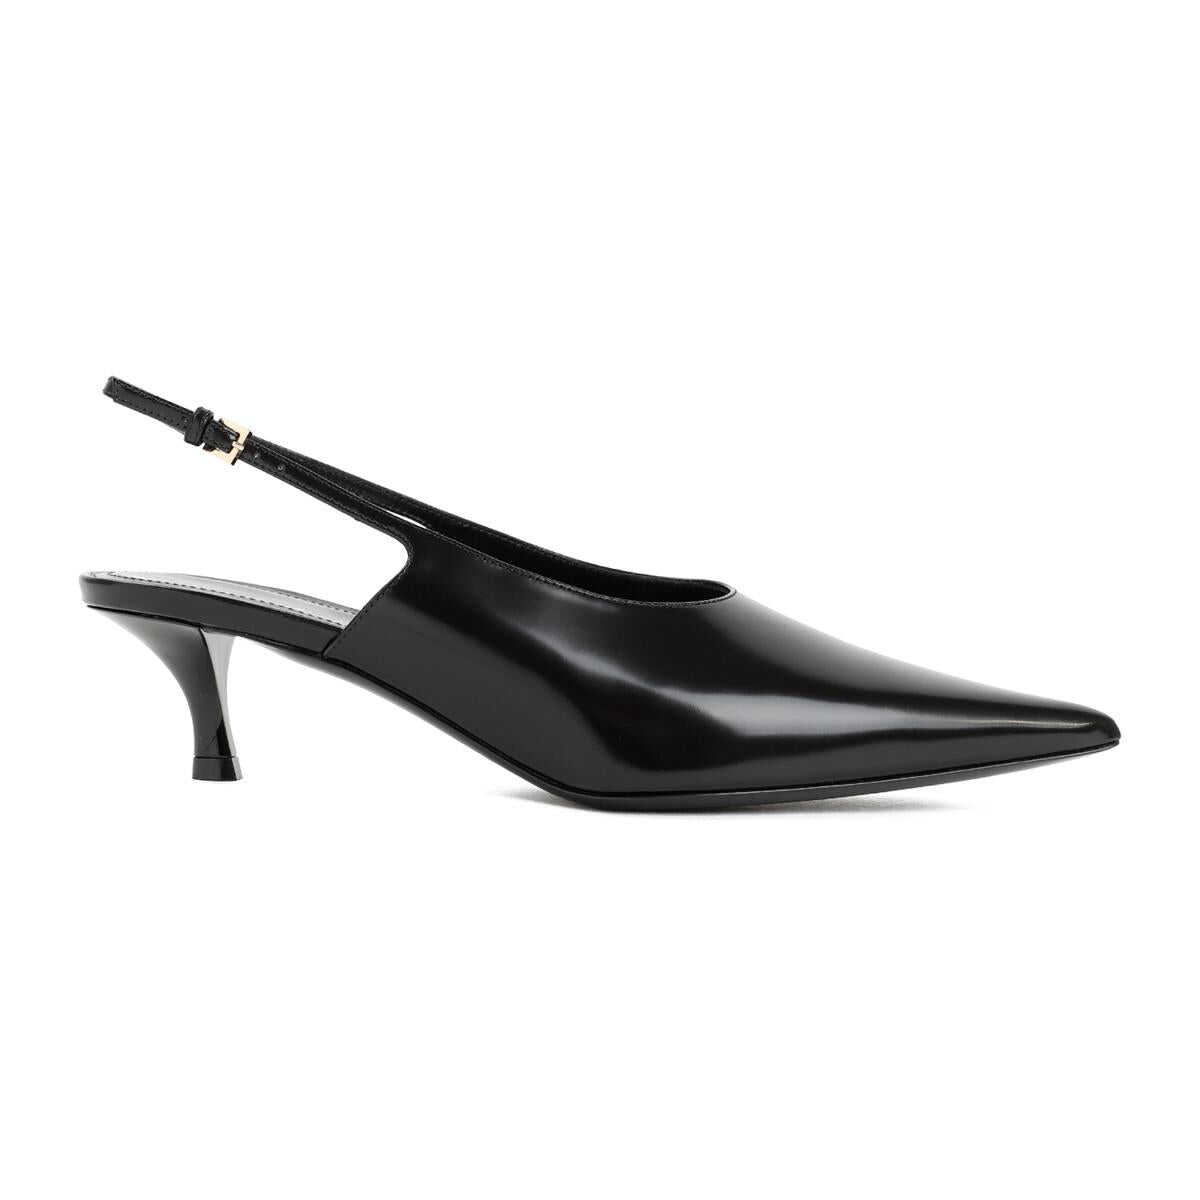 Givenchy GIVENCHY SHOW KITTEN HEELS SLINGBACK PUMPS SHOES BLACK